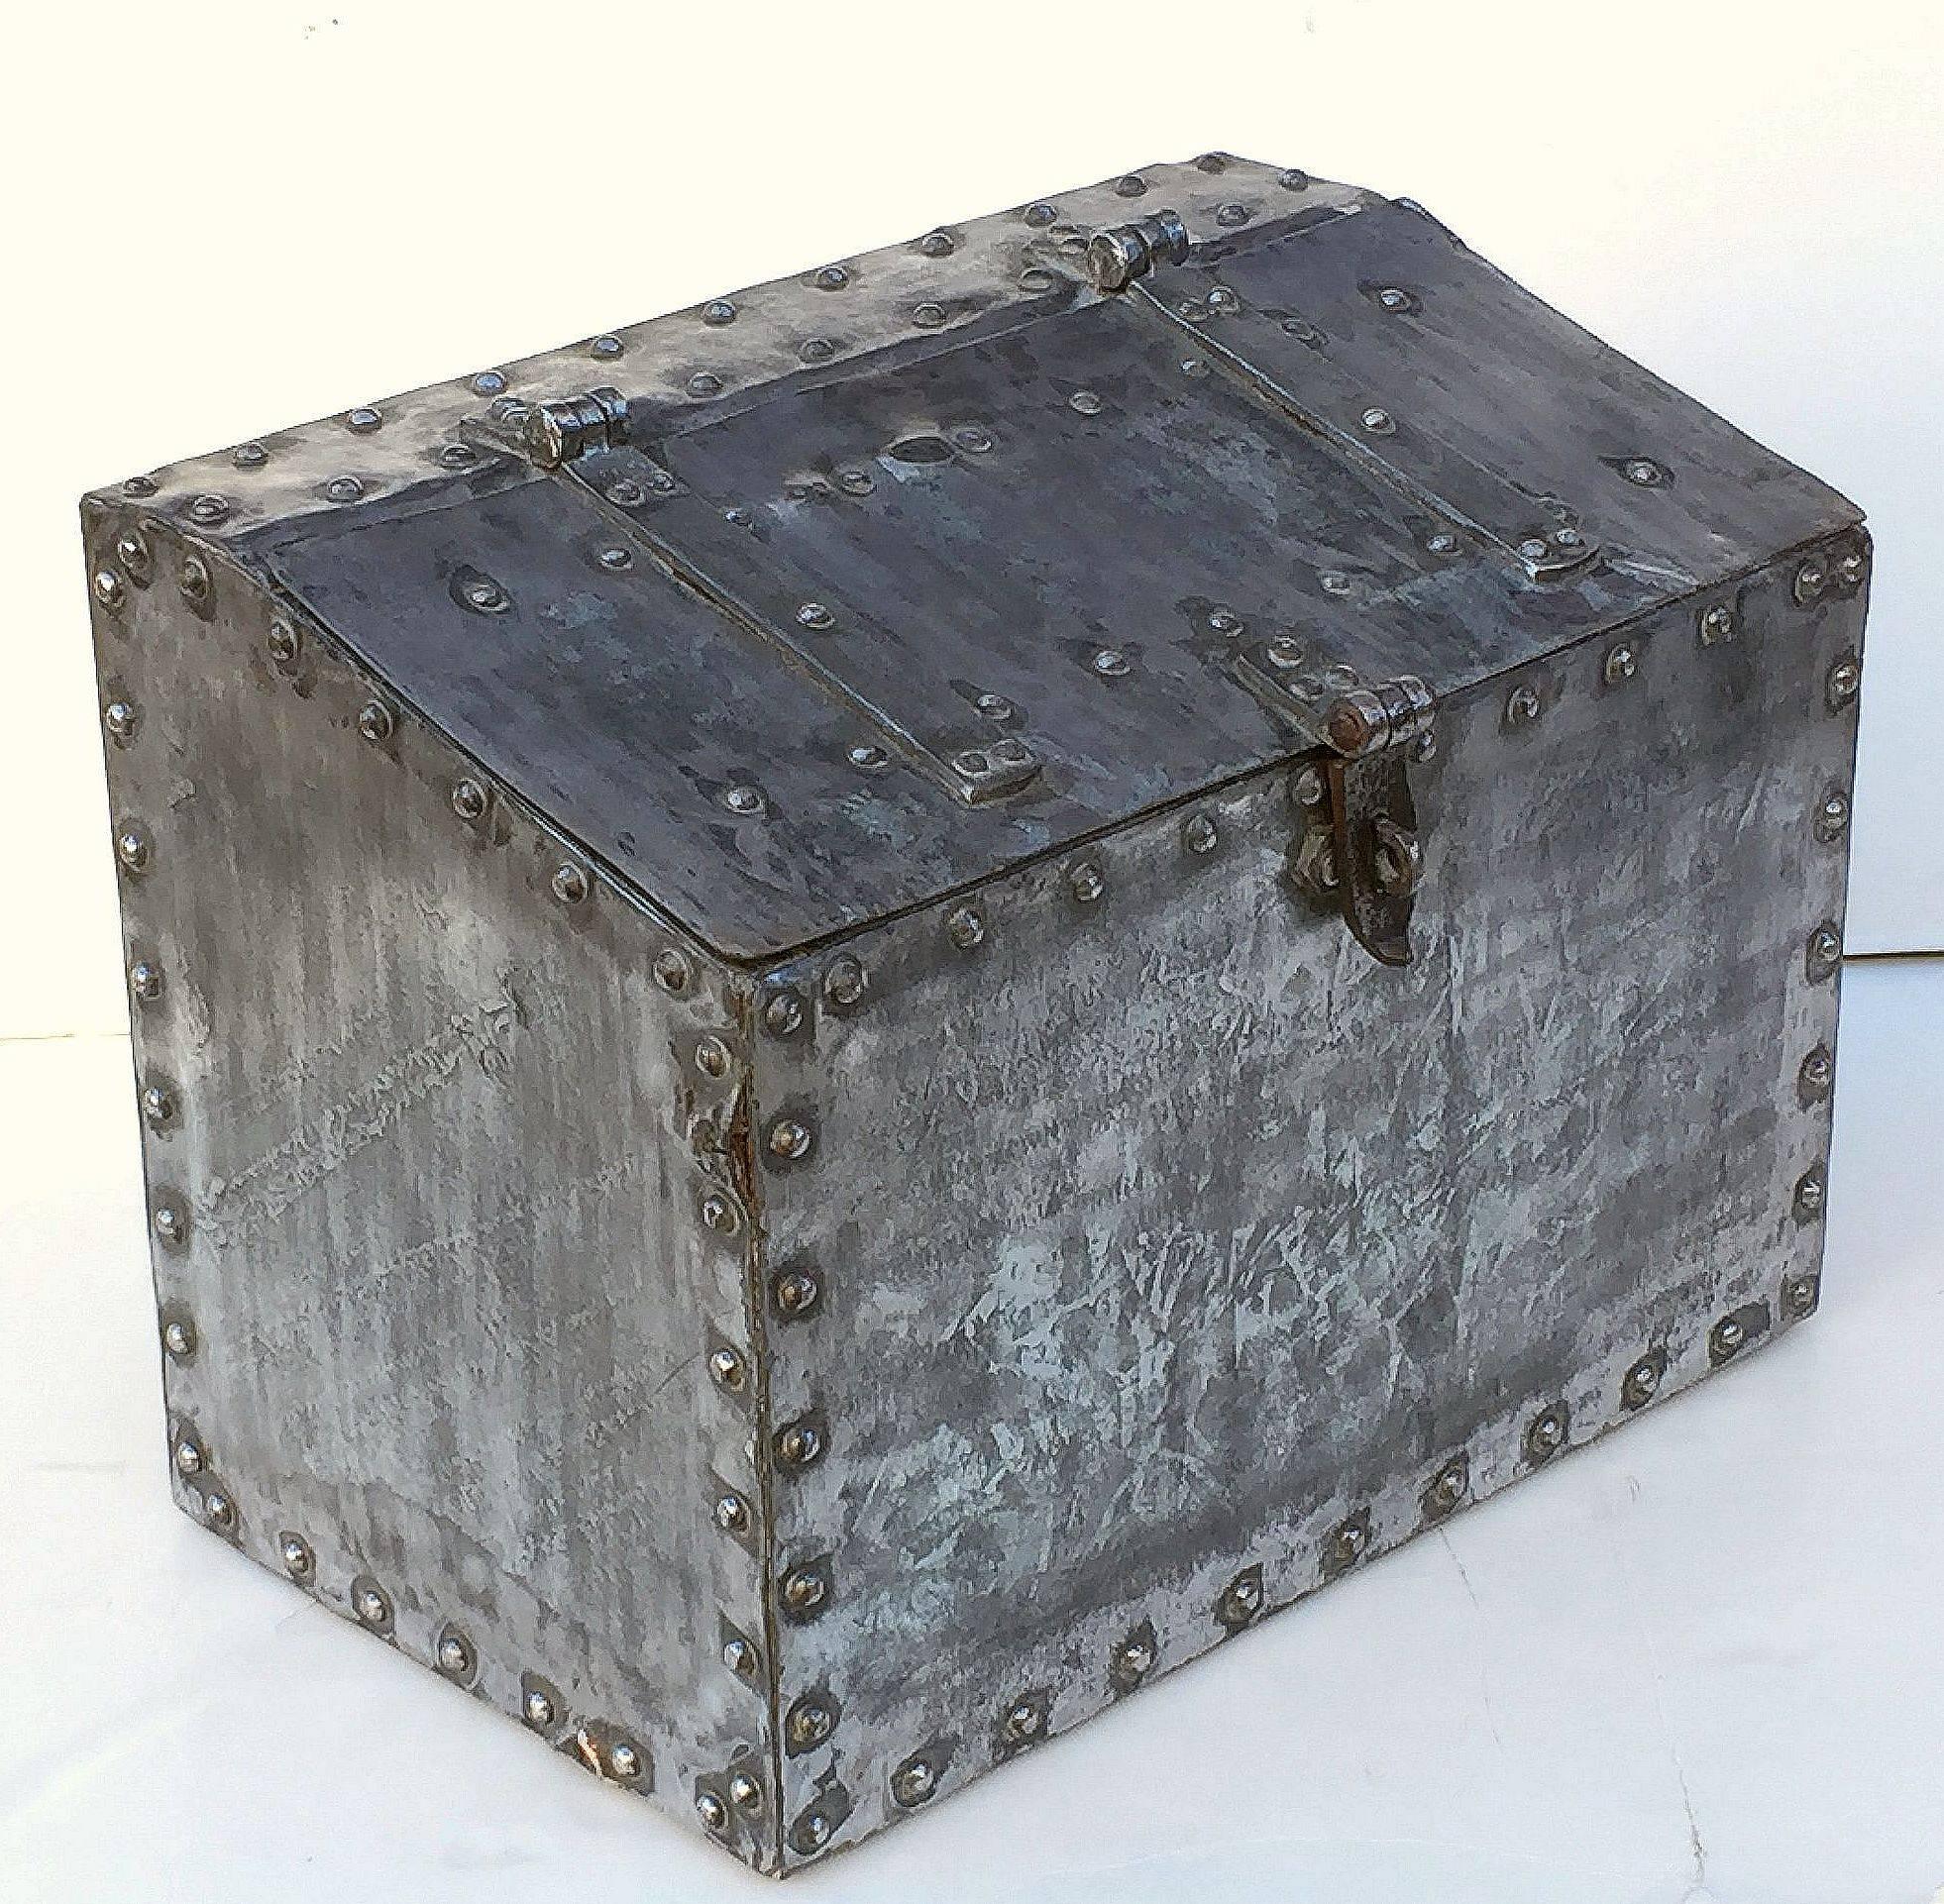 A handsome large English trunk or grain storage bin of polished iron from the 19th century, featuring a canted front with hinged lid and bolted cladding around the whole.